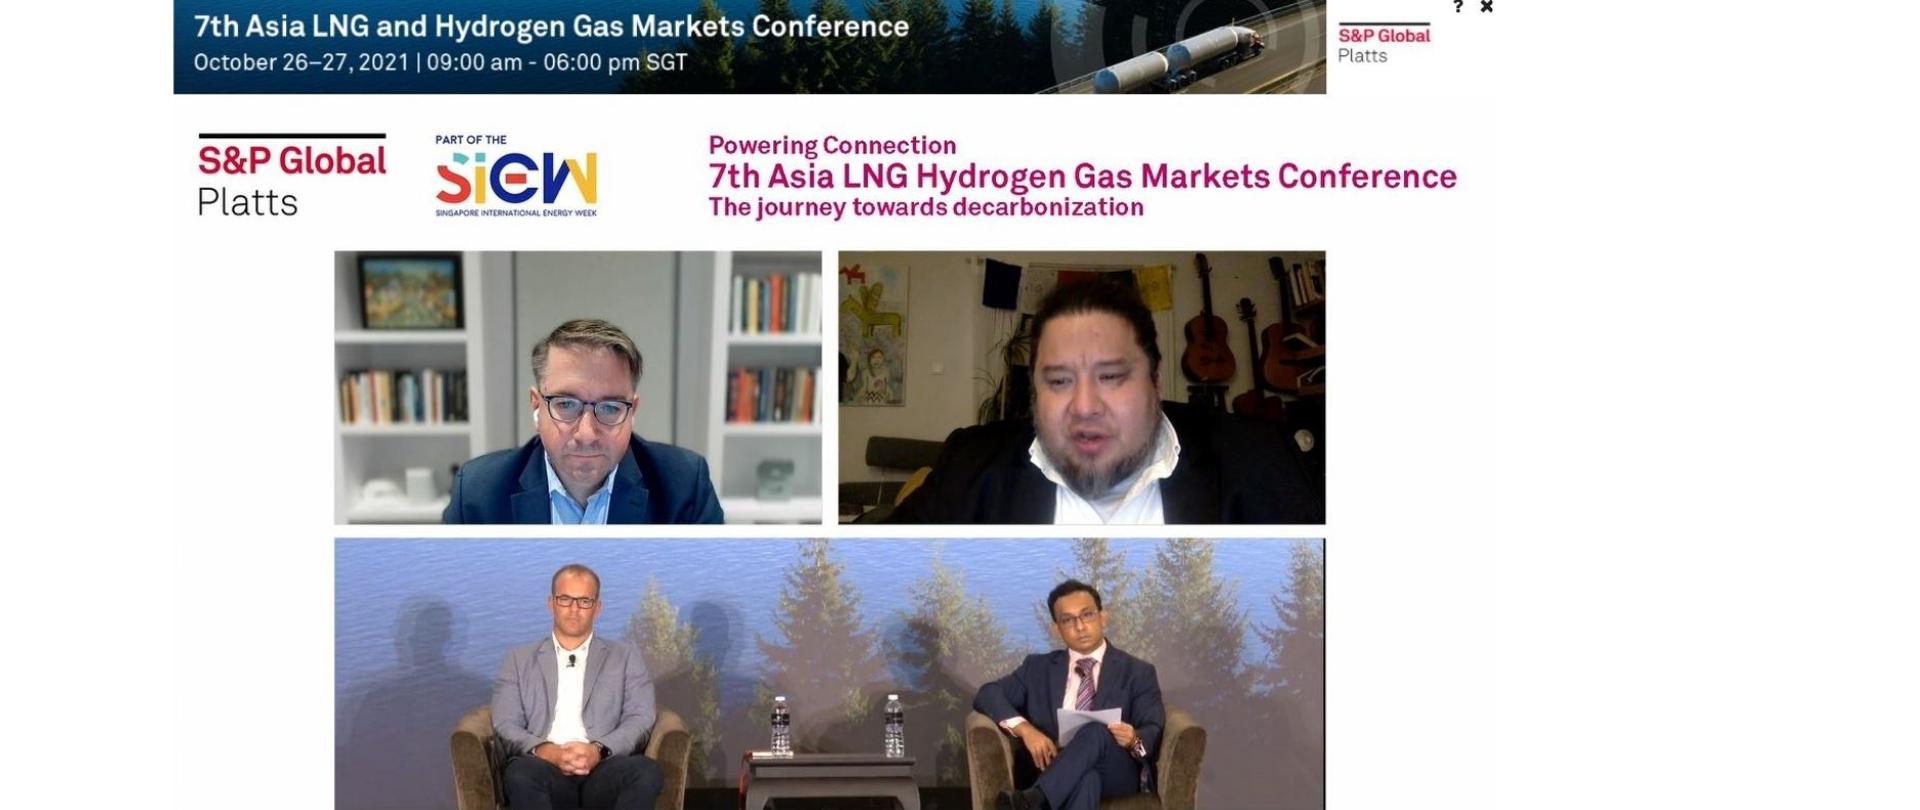 7th Asia LNG Hydrogen Gas Markets Conference